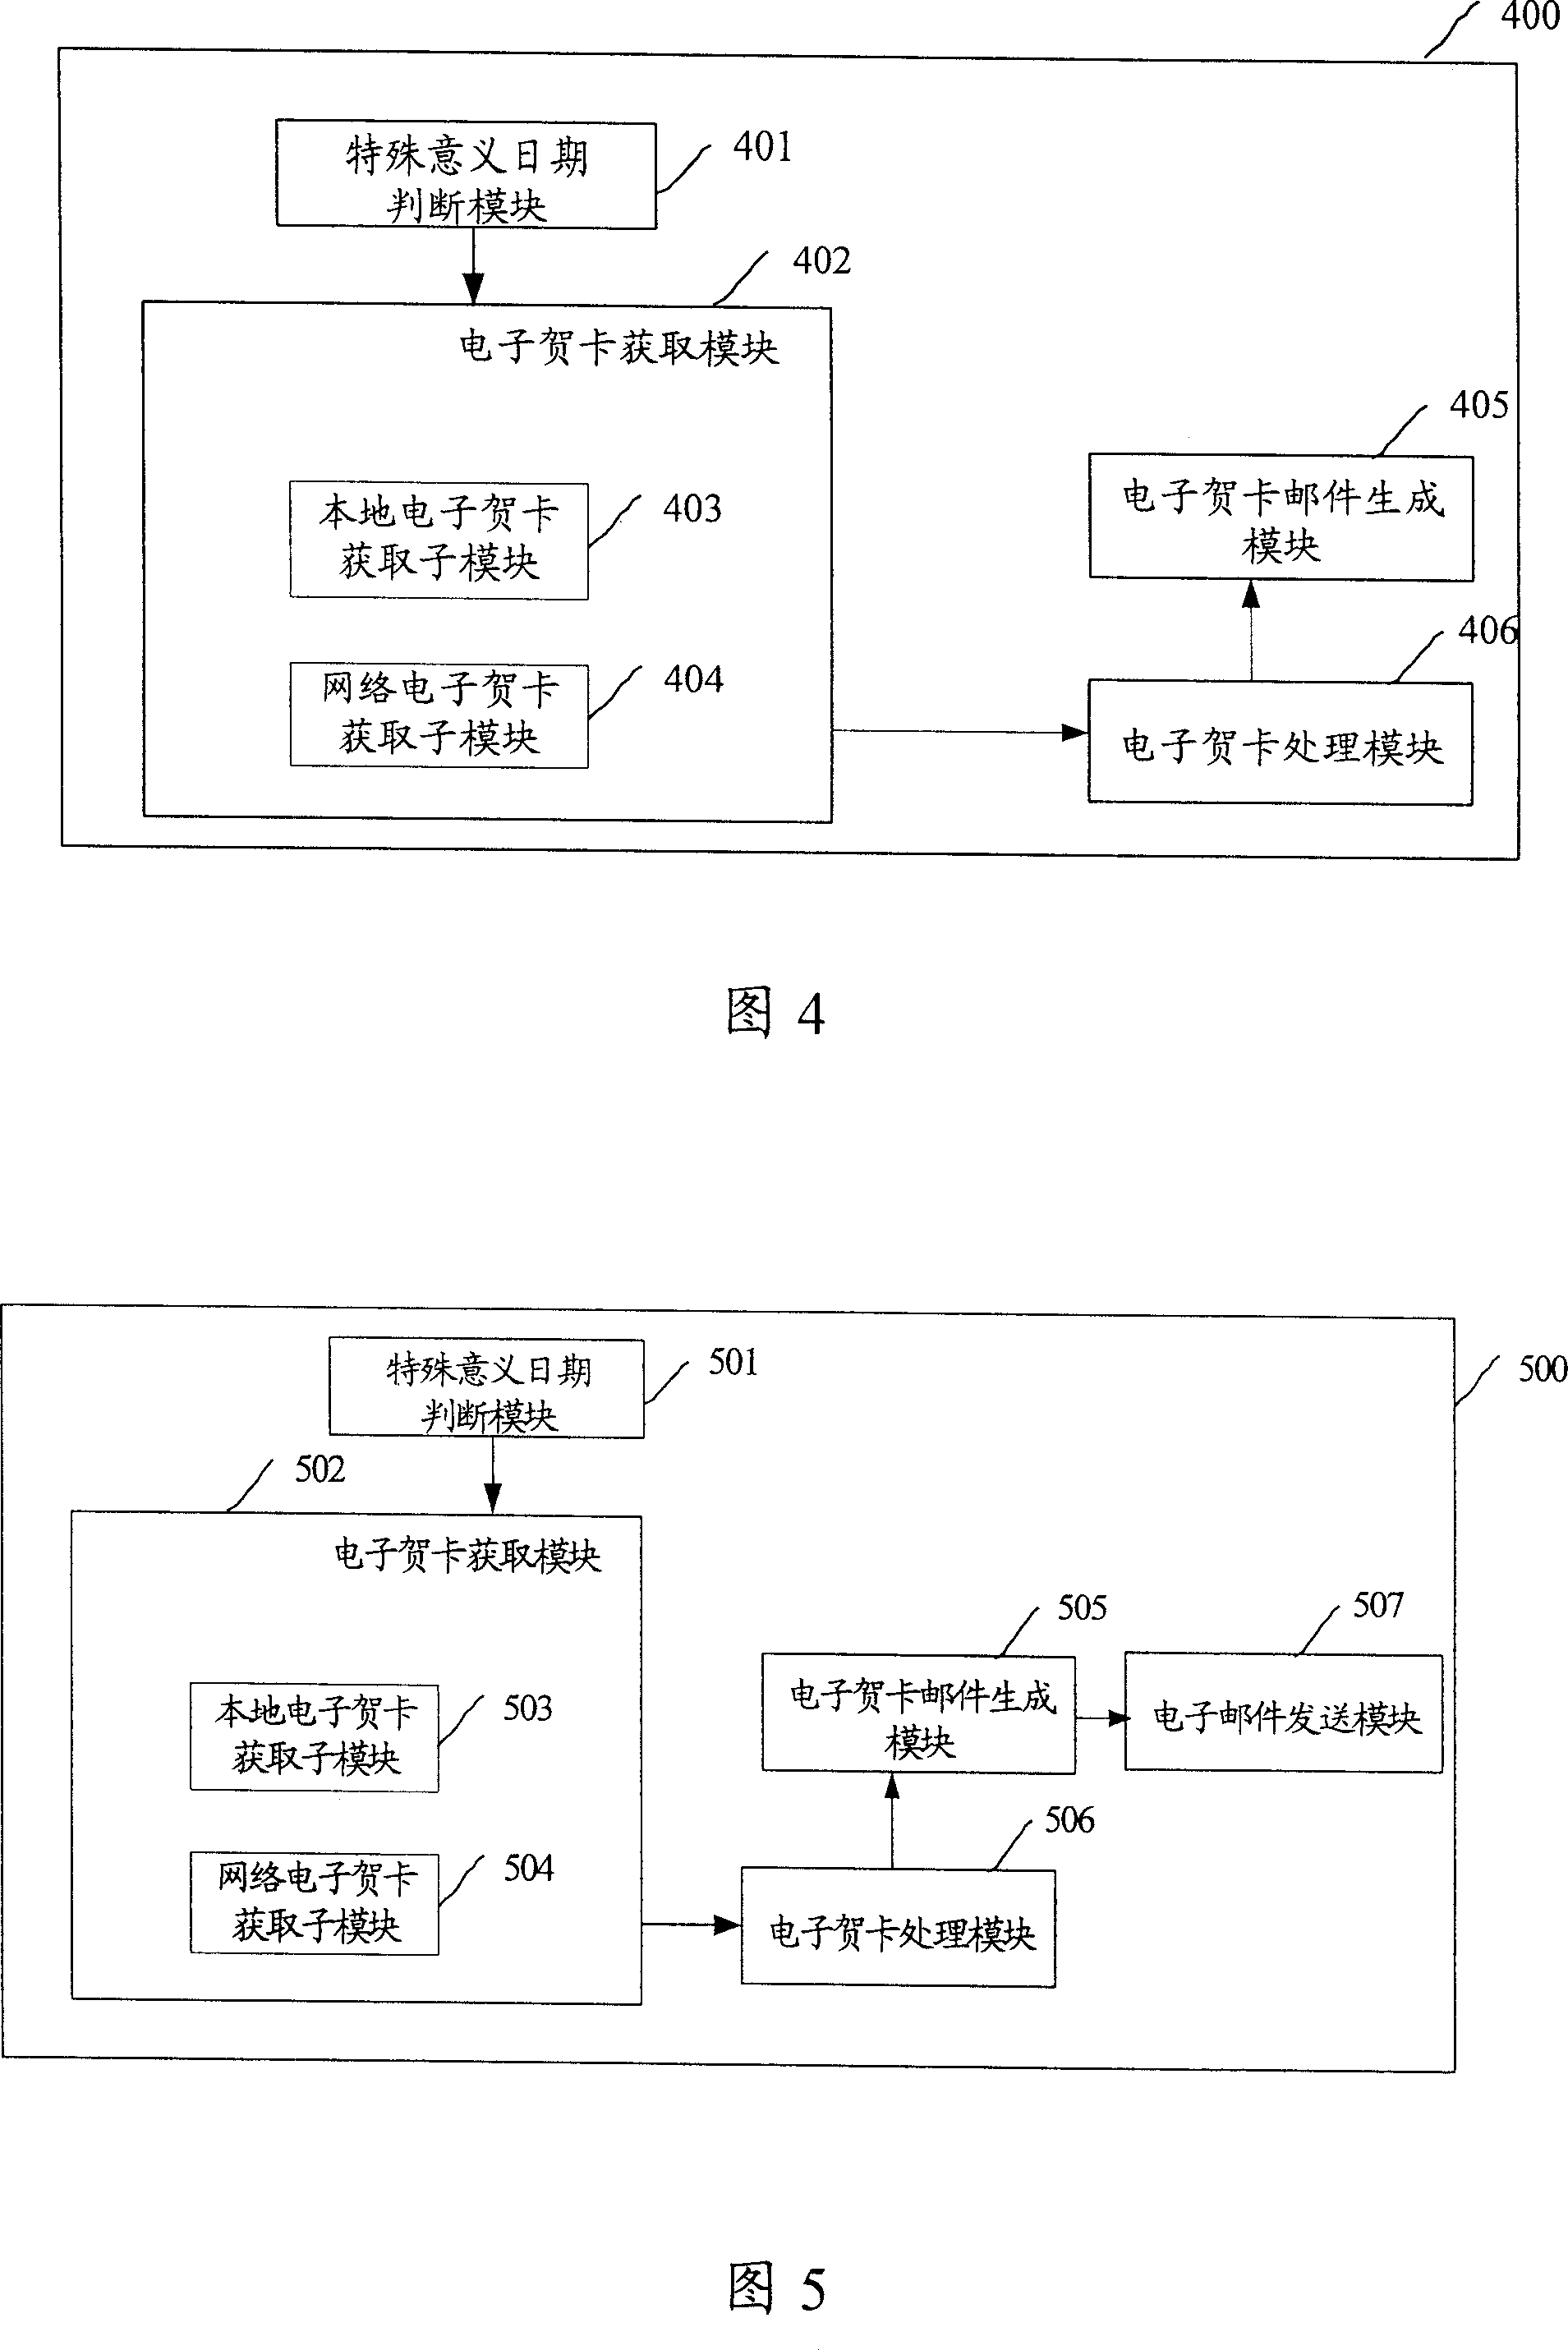 Method and system for generating electron congratulating card mail